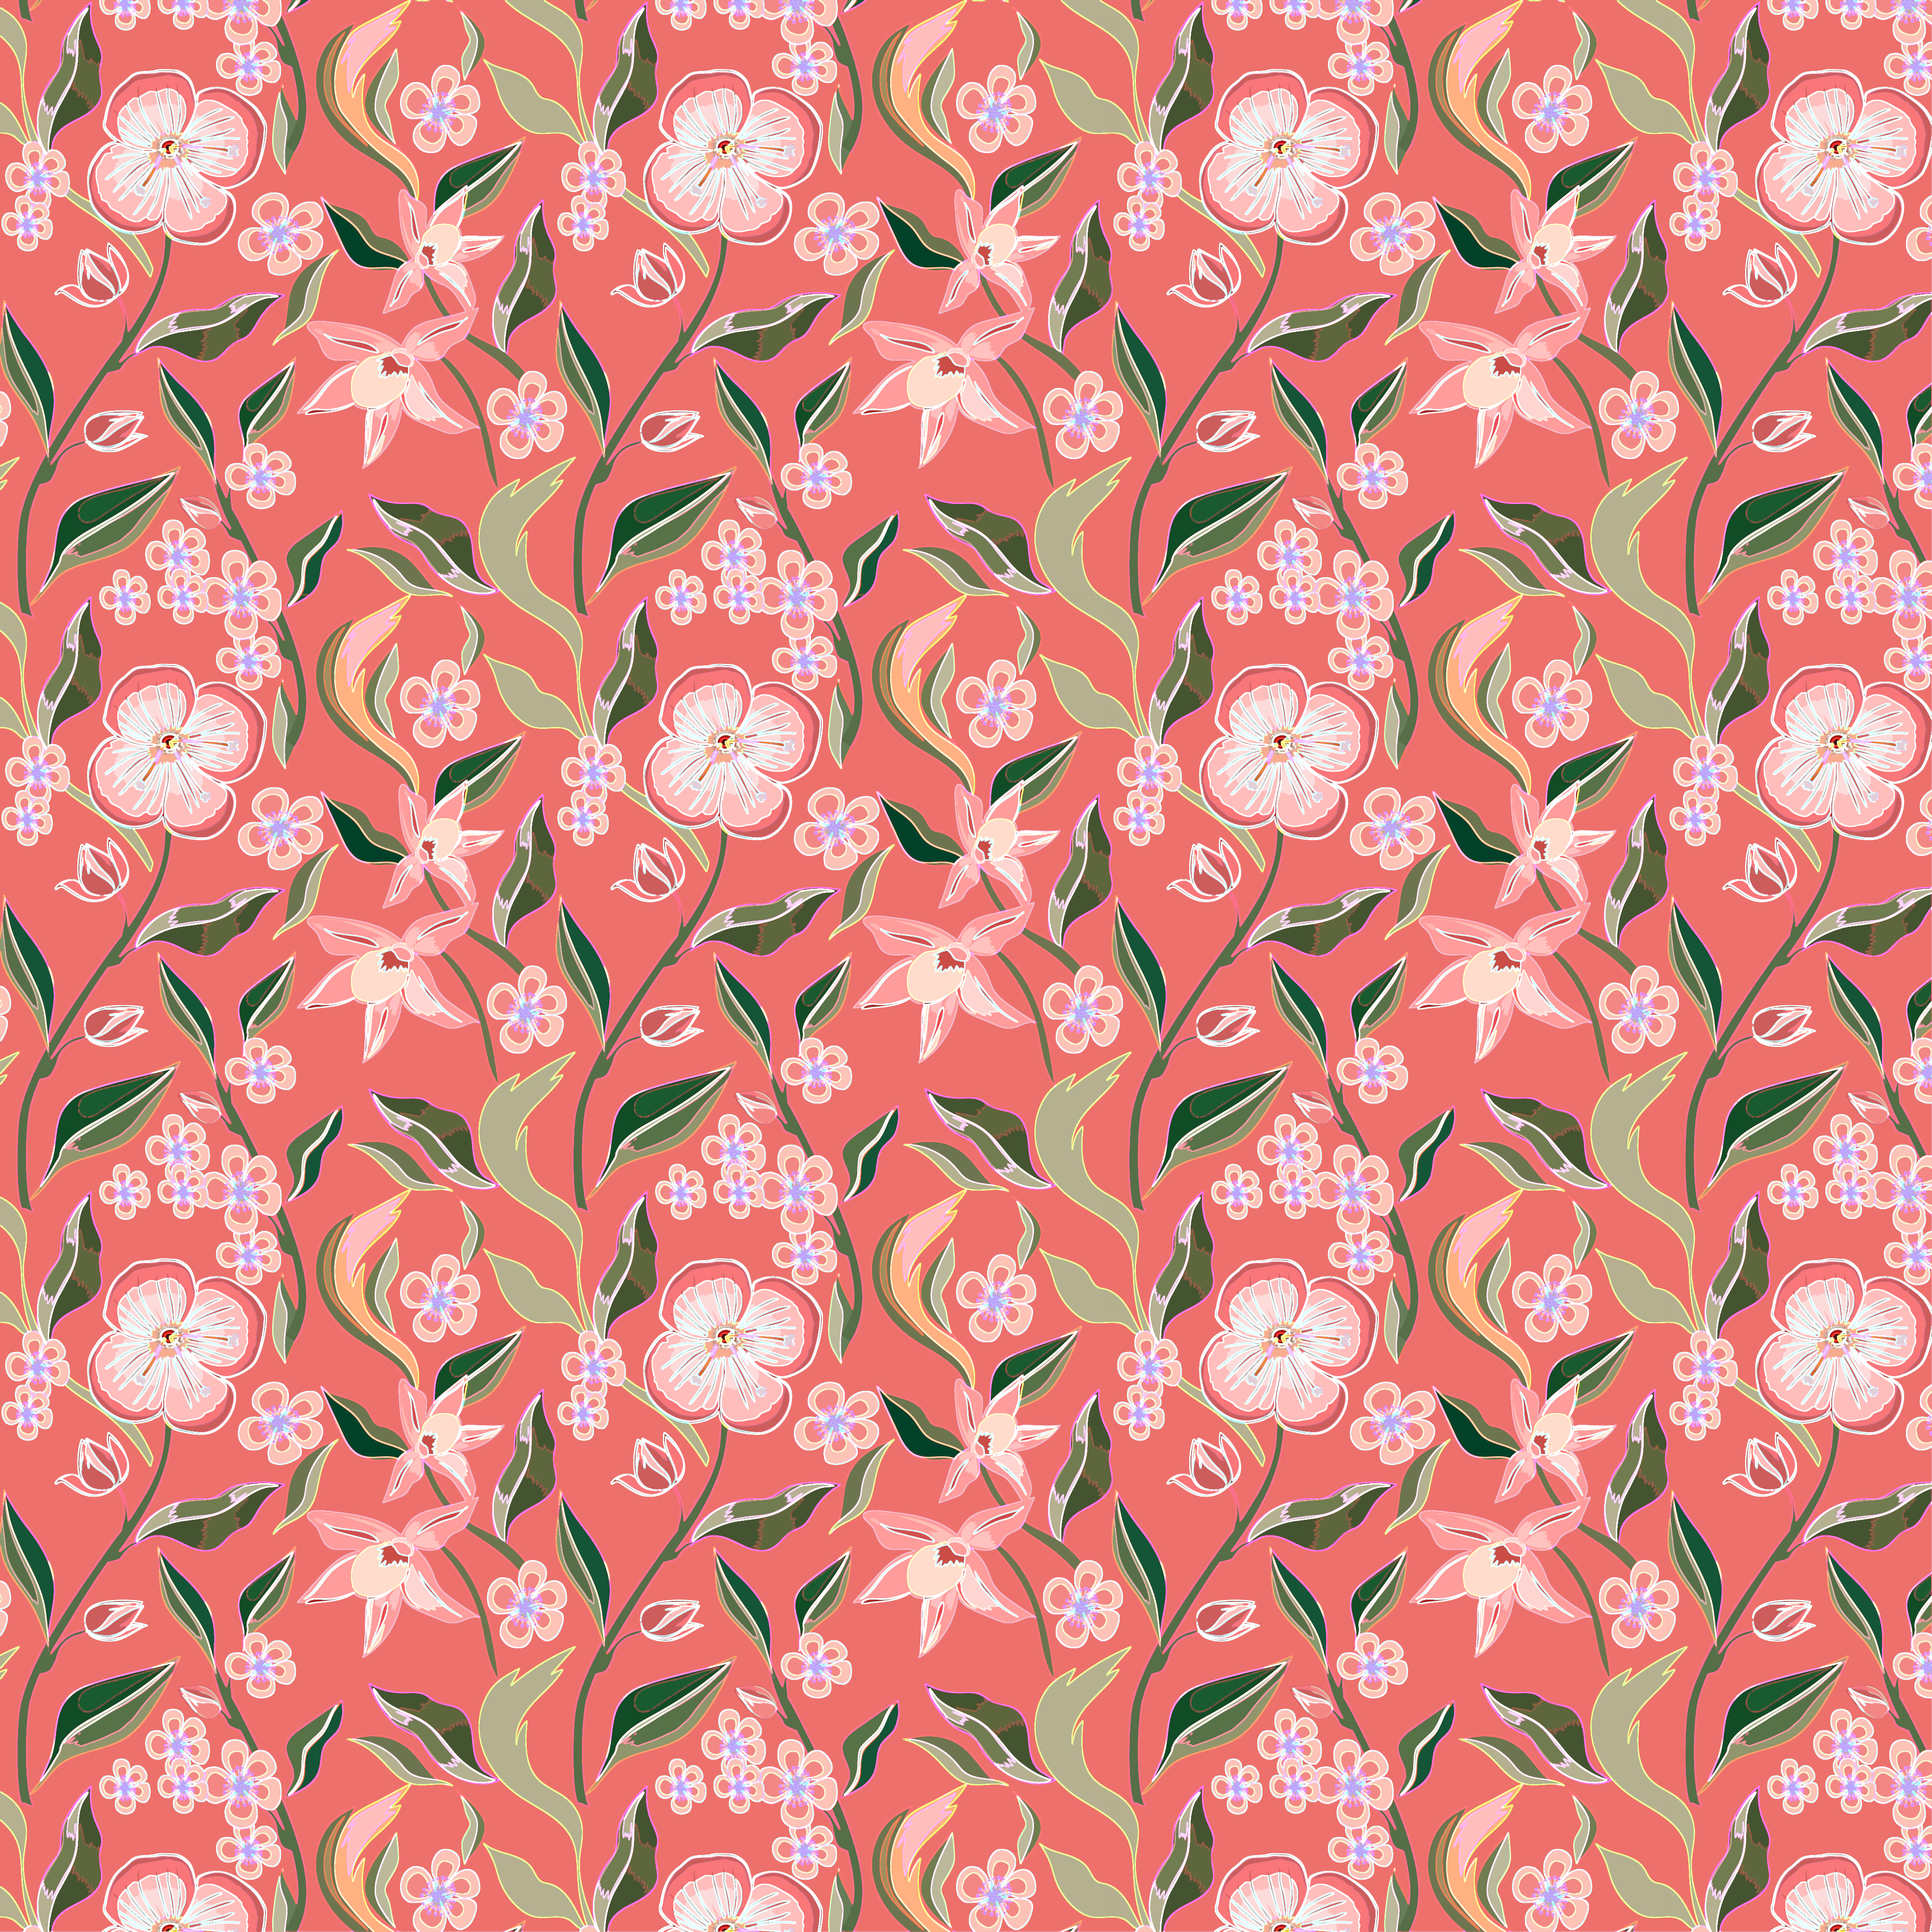 A pattern of flowers and leaves on a pink background 1